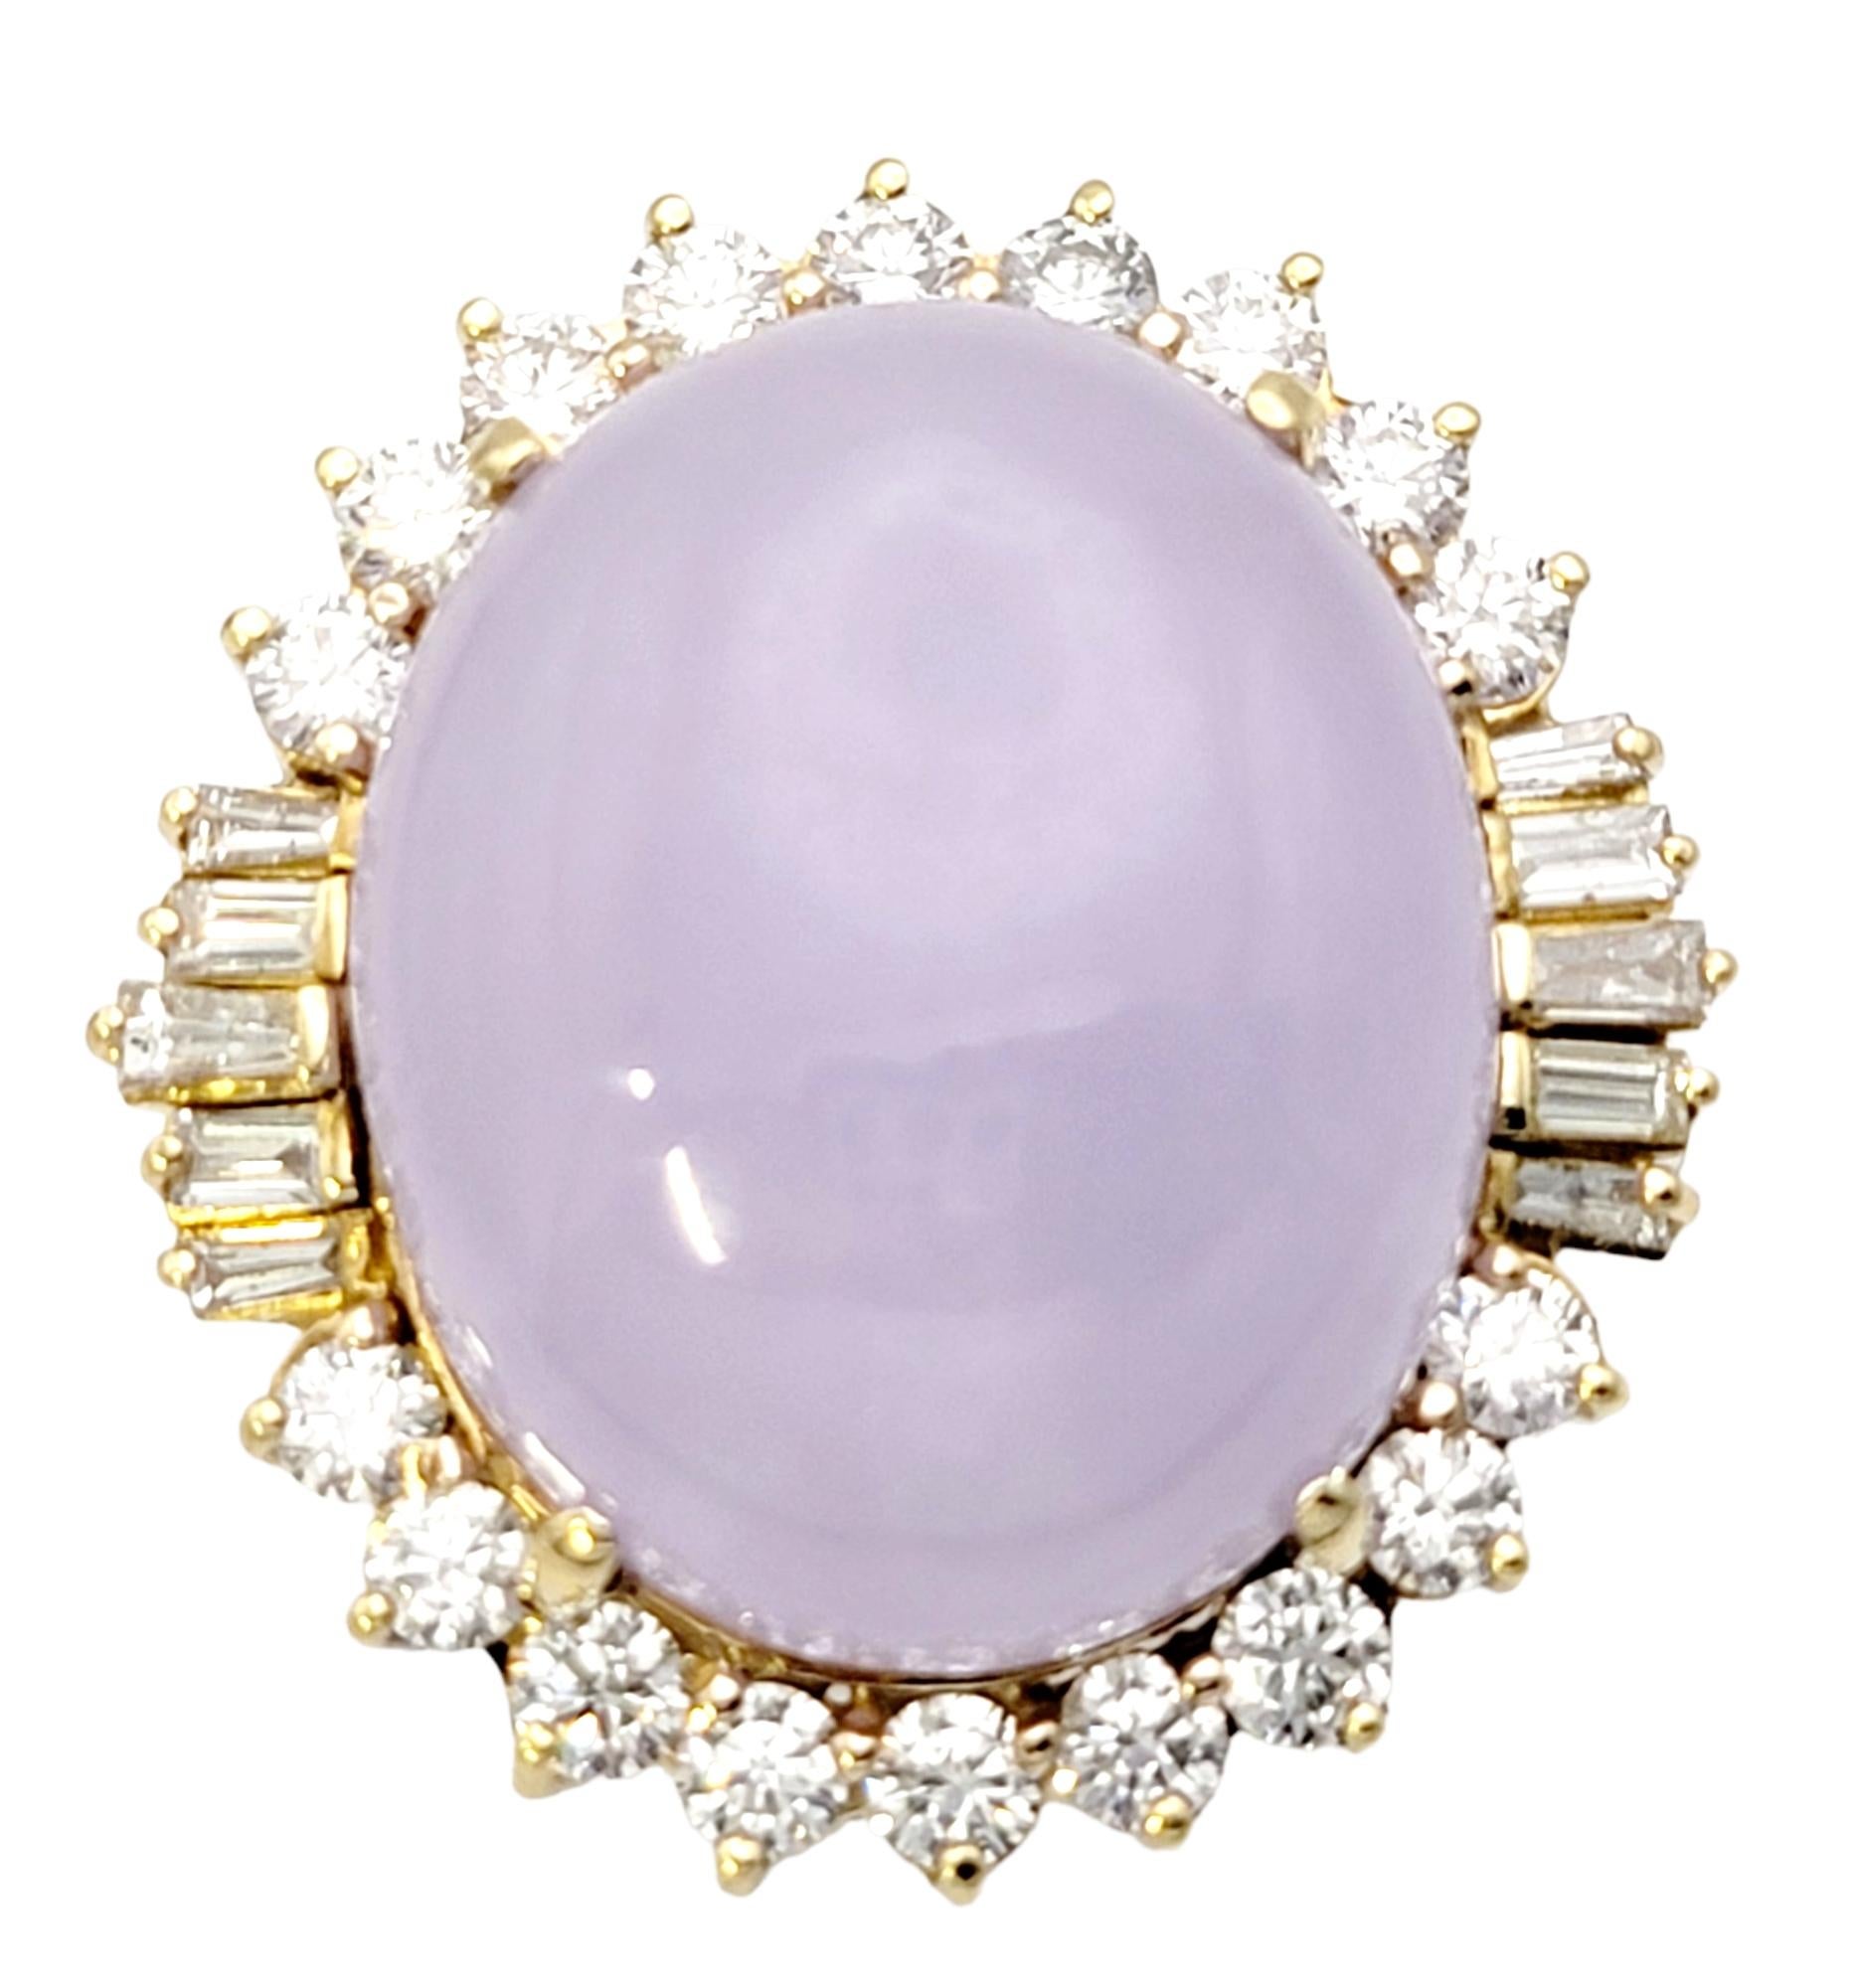 Ring size: 7

This jaw dropping lavender jade and diamond halo cocktail ring has all the wow factor you've been looking for! Striking in both size and color, this spectacular piece will not go unnoticed. 

The stunning oval cabochon lavender jade